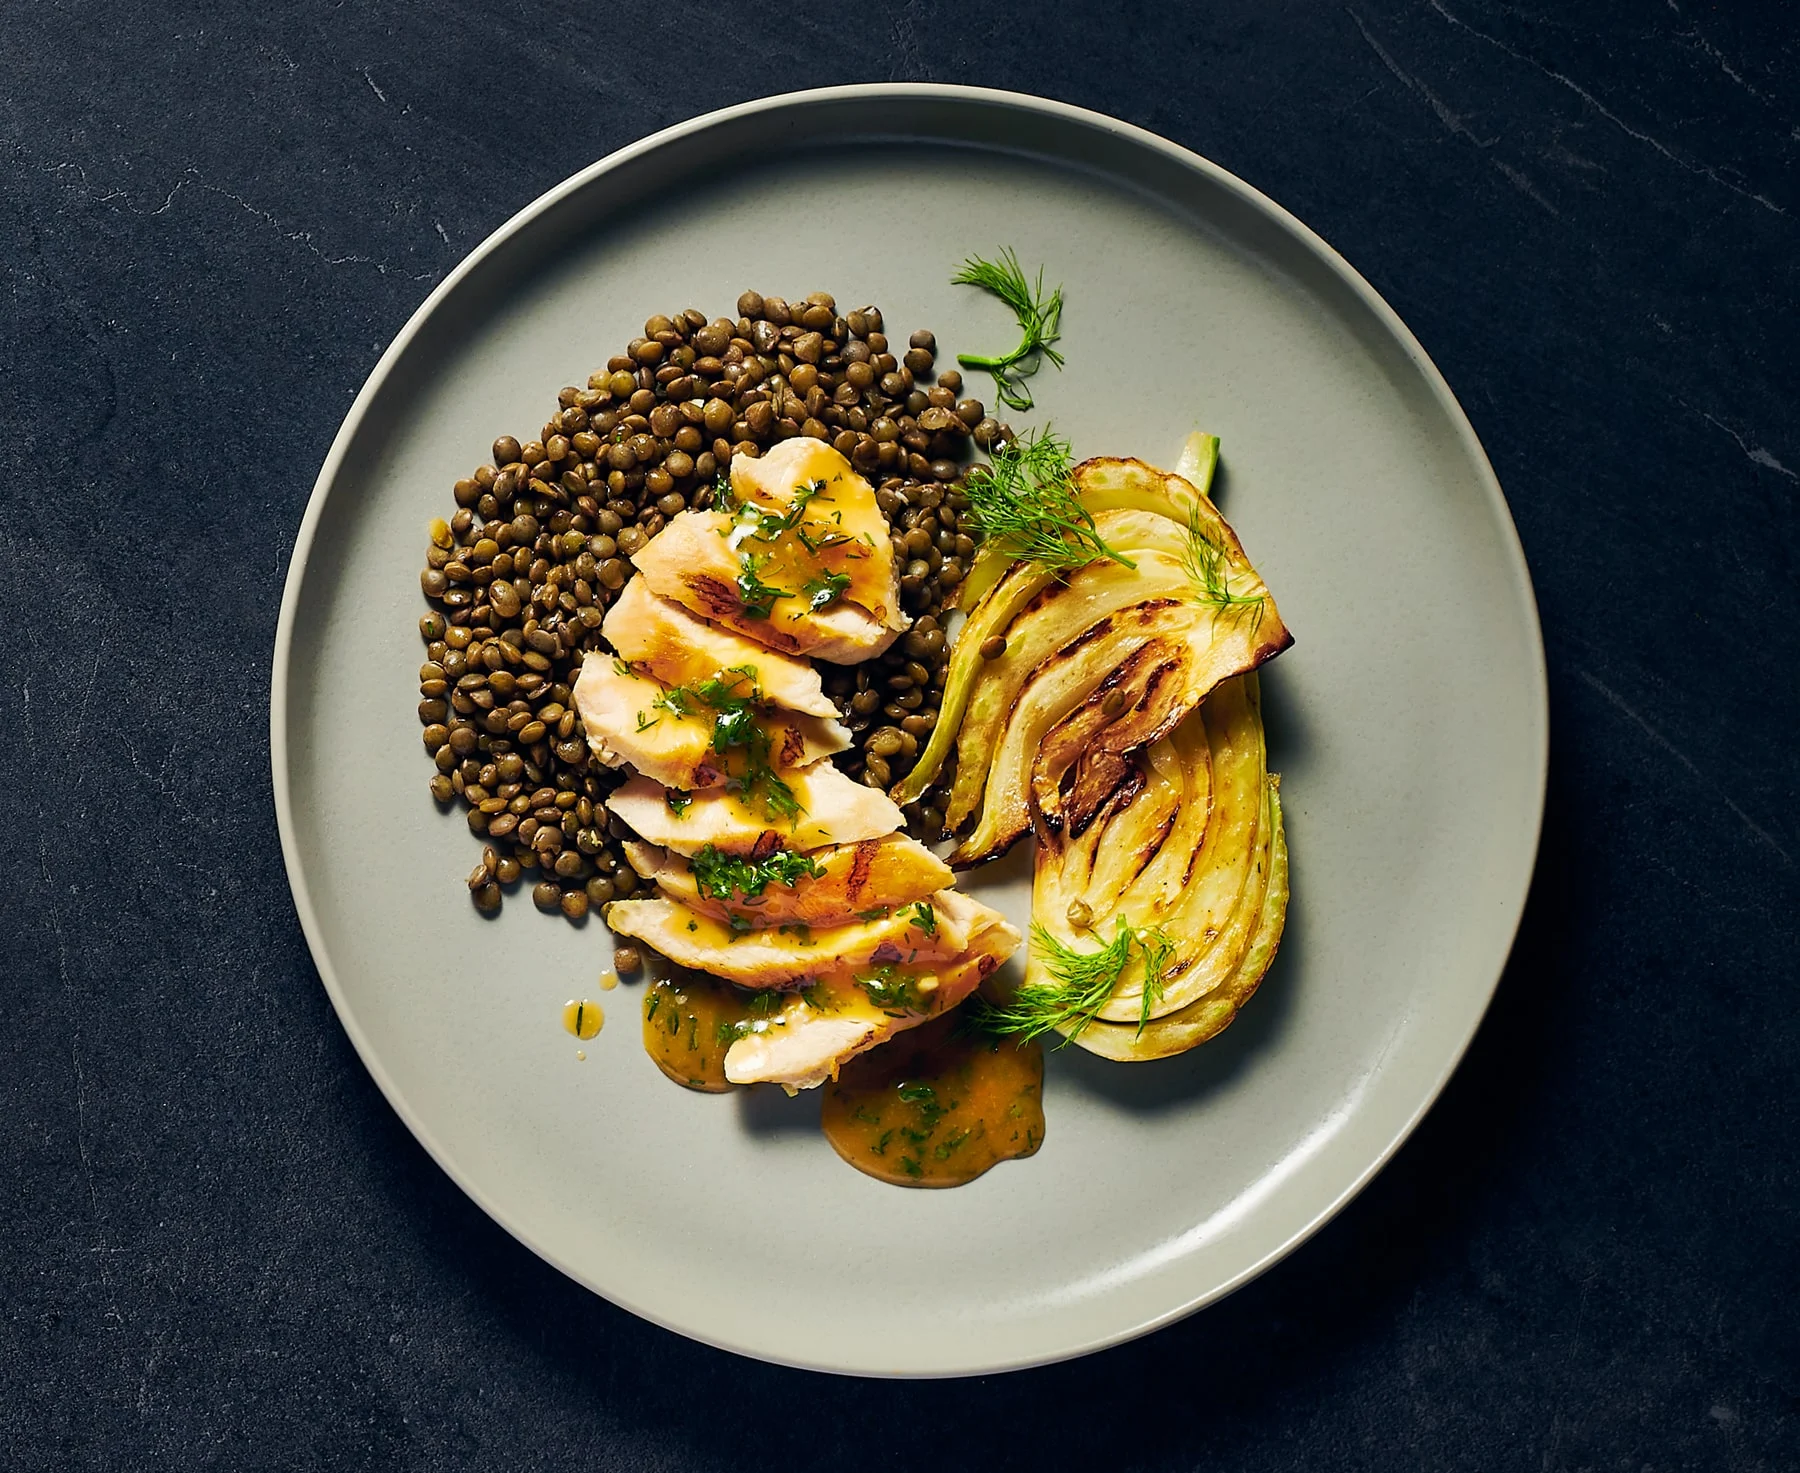 Roasted chicken with lentils and onion